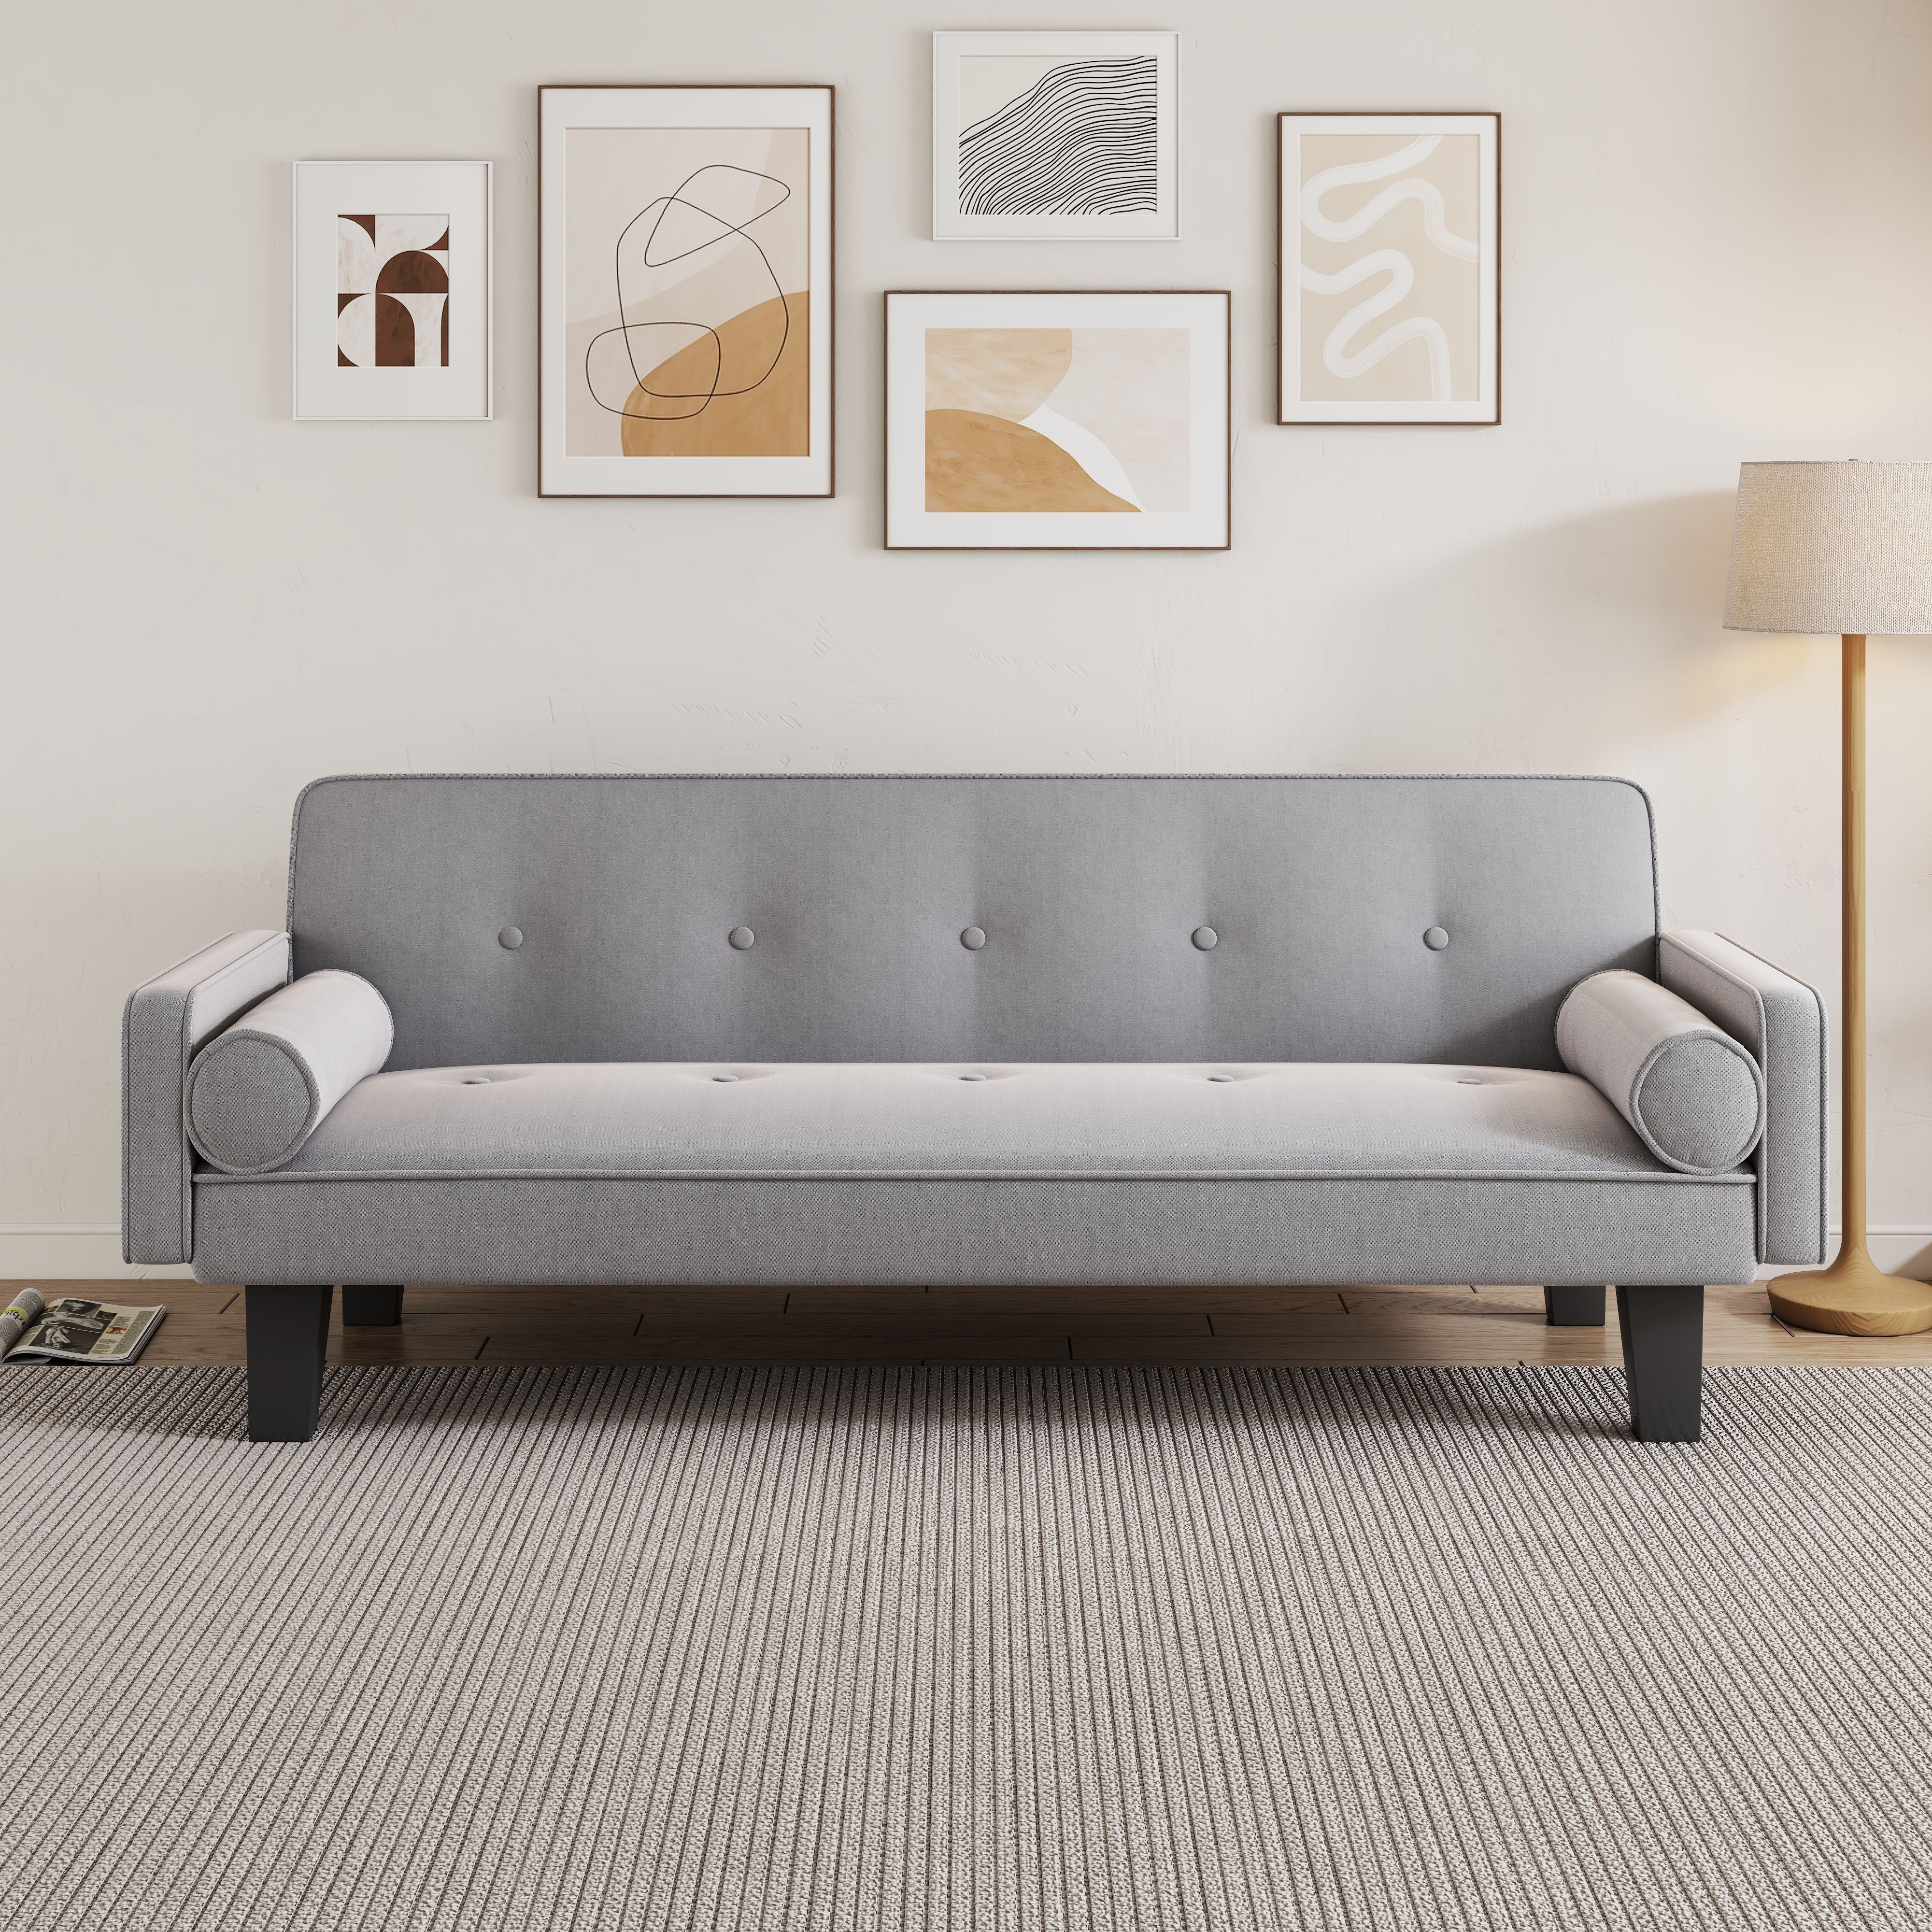 The Sofa Can Be Converted Into A Sofa Bed, Including Two Pillows, 72 "Light Grey Cotton Linen Sofa Bed Suitable For Family Living Rooms